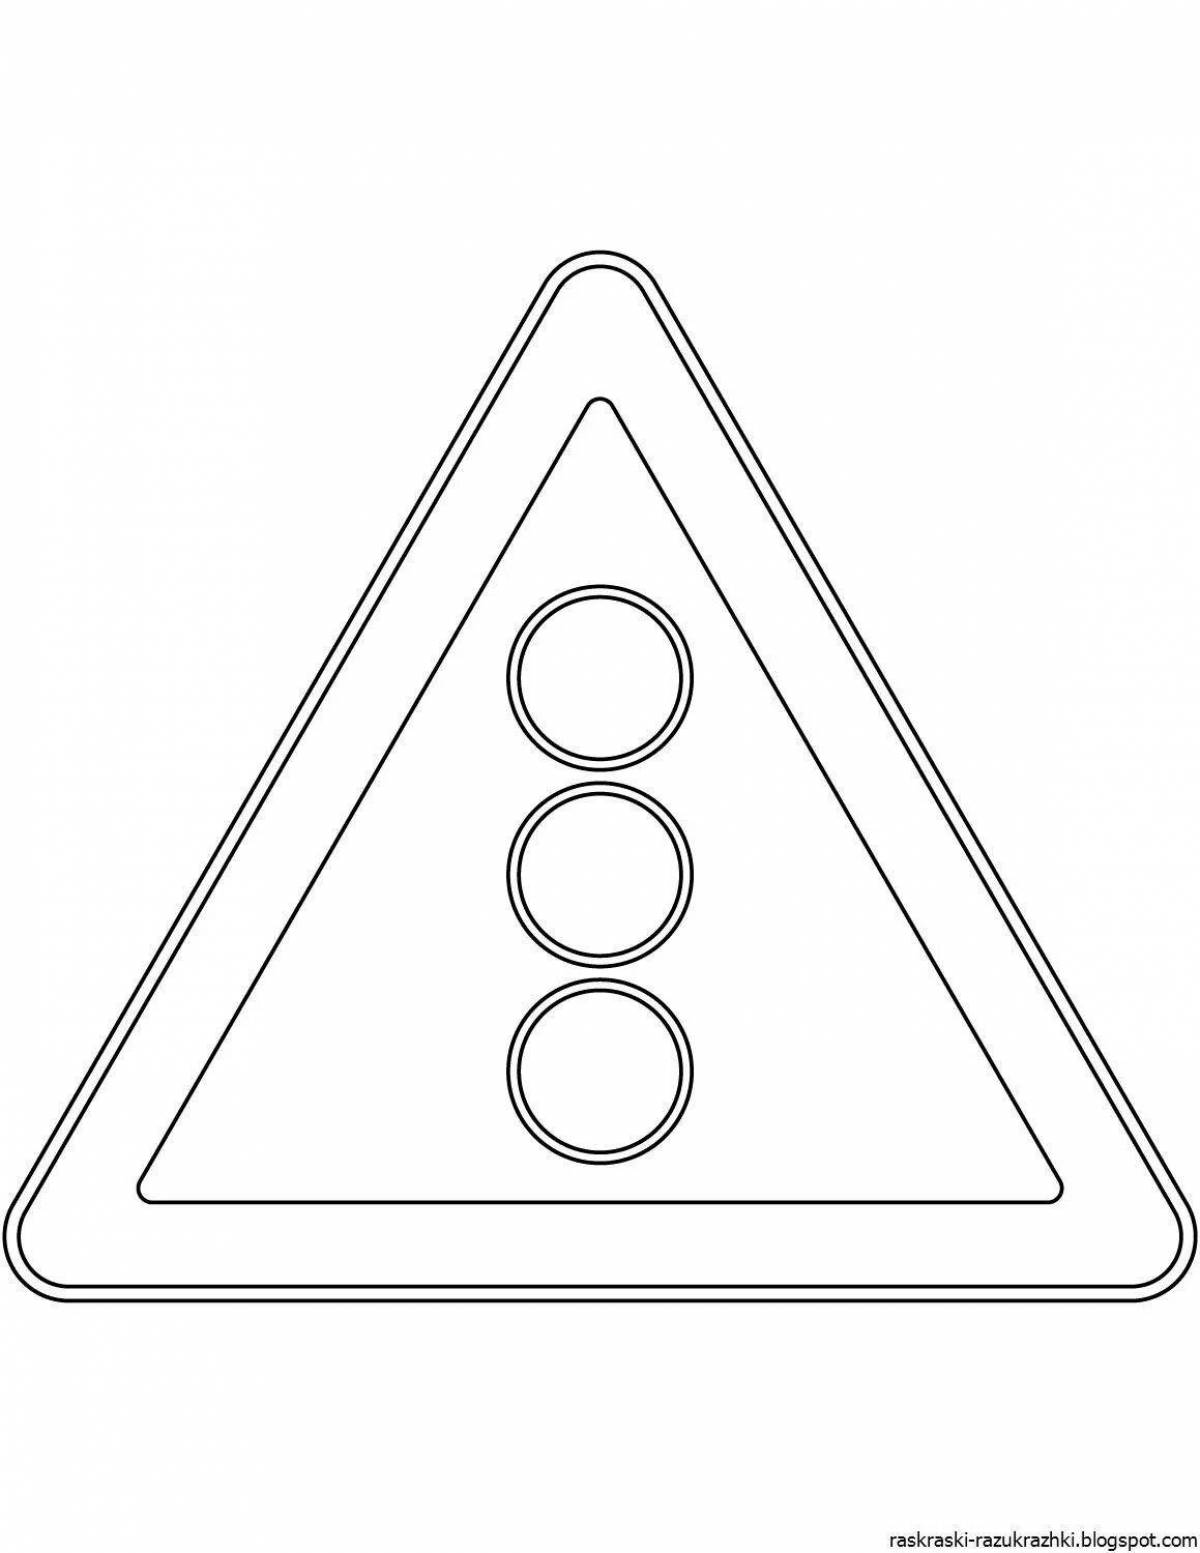 Stimulating traffic signs coloring pages for schoolchildren